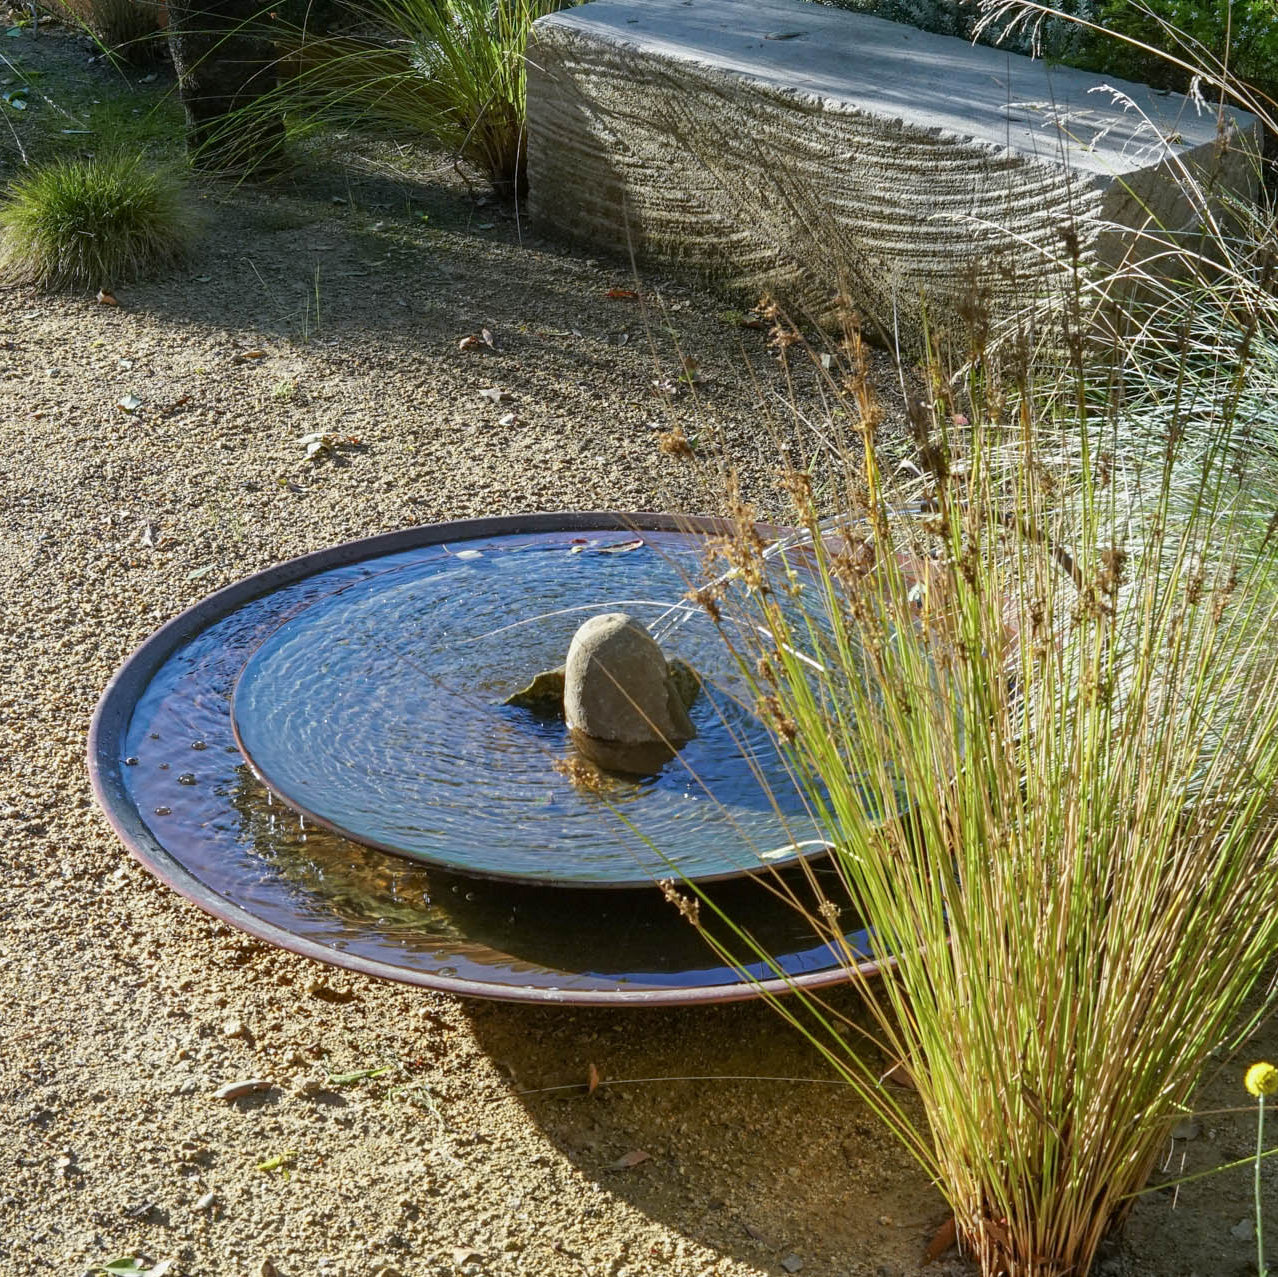 Stacked Dishes Water Feature